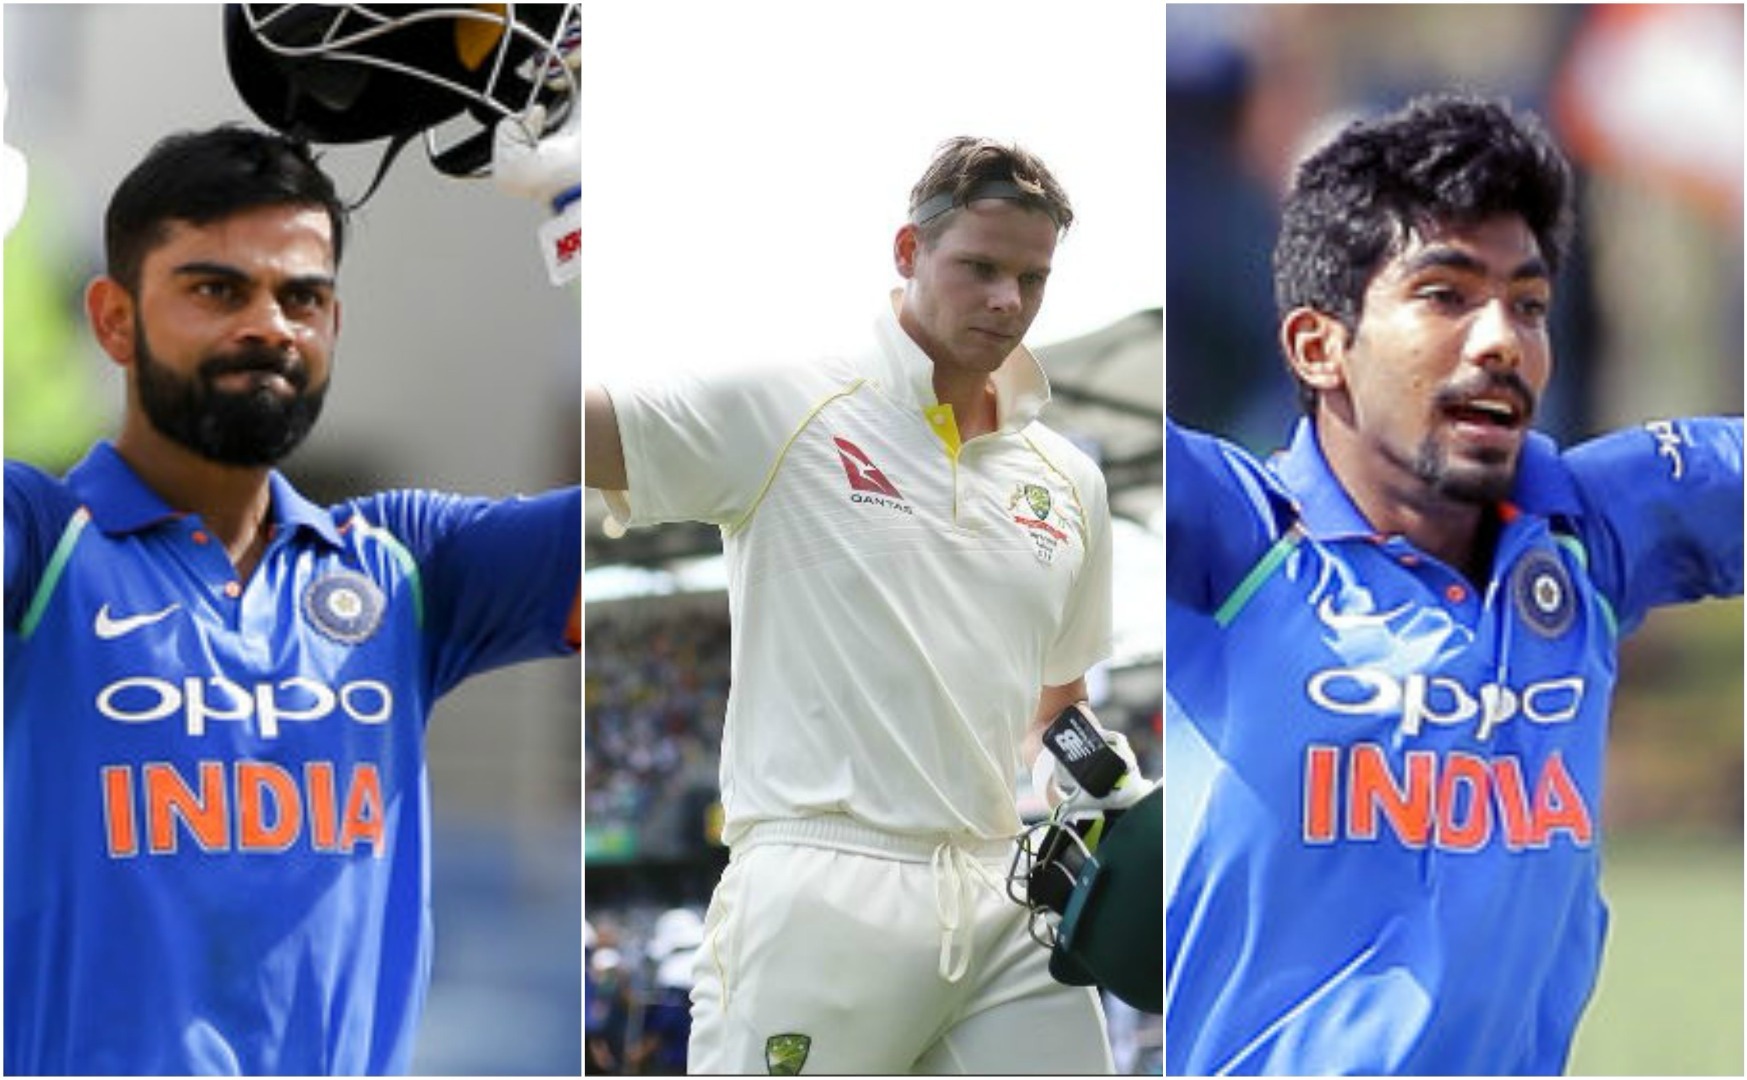 Three Indians each in both ICC Test & ODI team of the Year Three Indians each in both ICC Test & ODI team of the Year